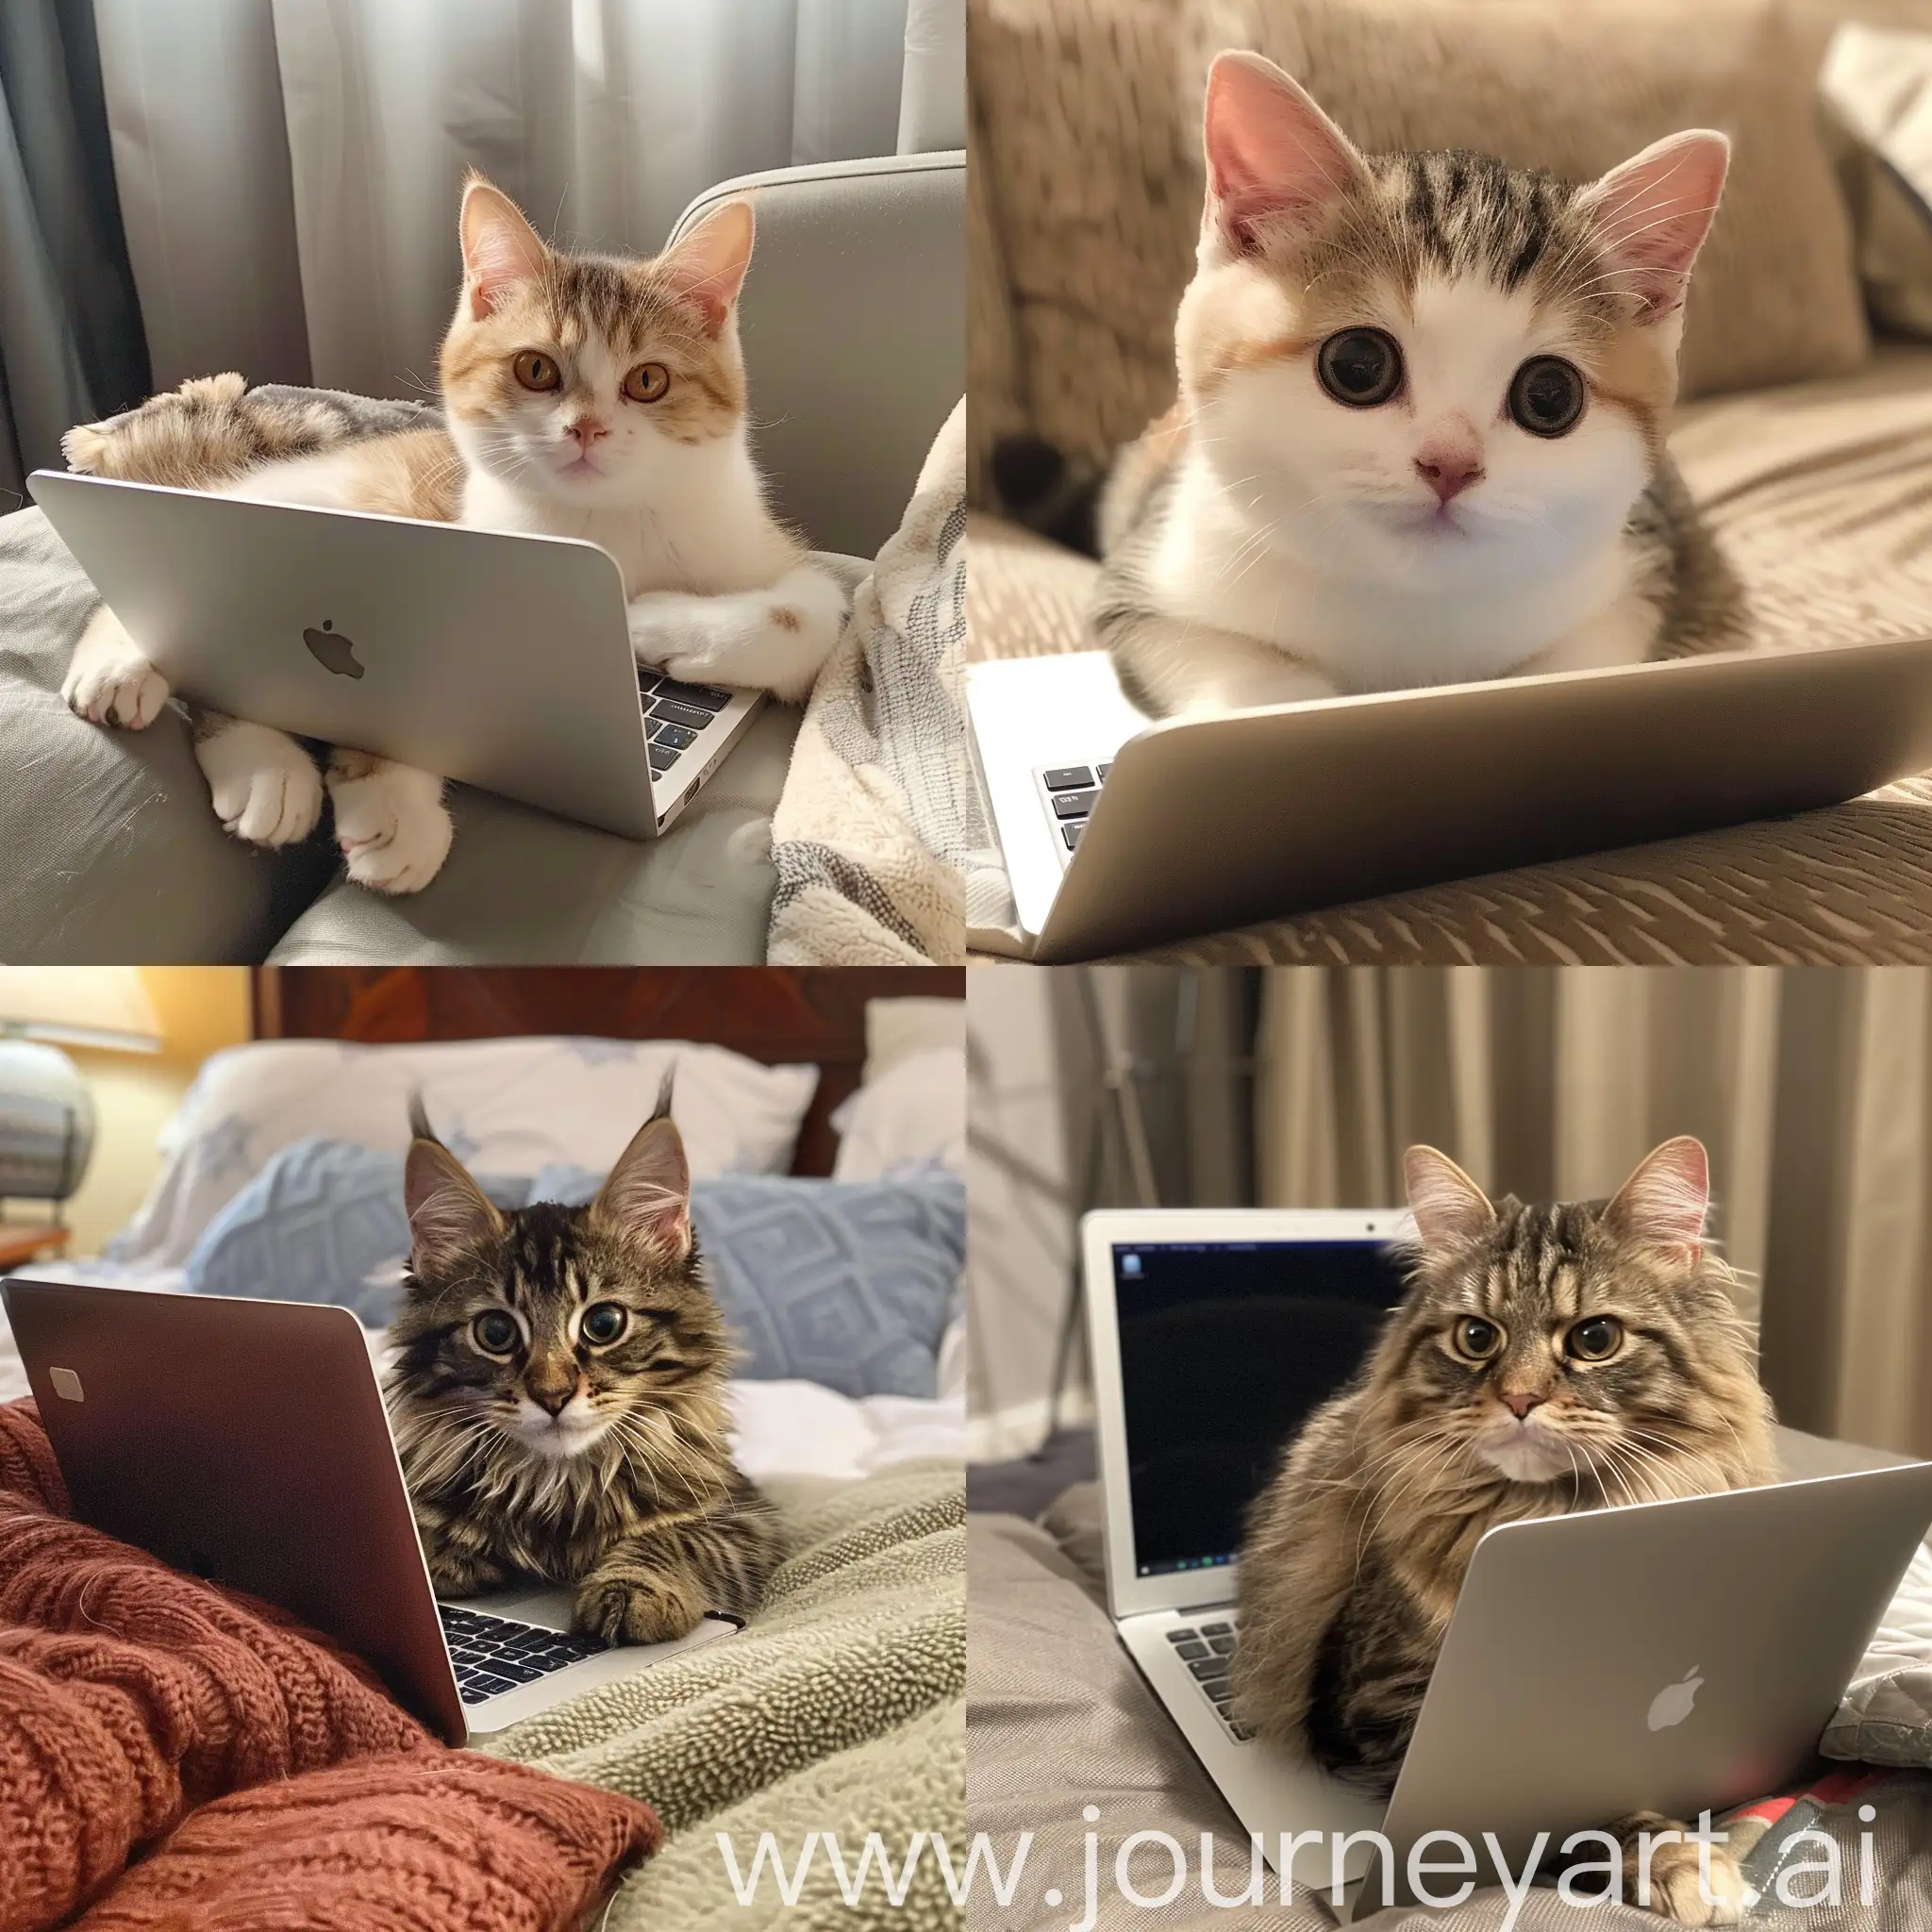 Adorable-Cat-Working-on-a-Laptop